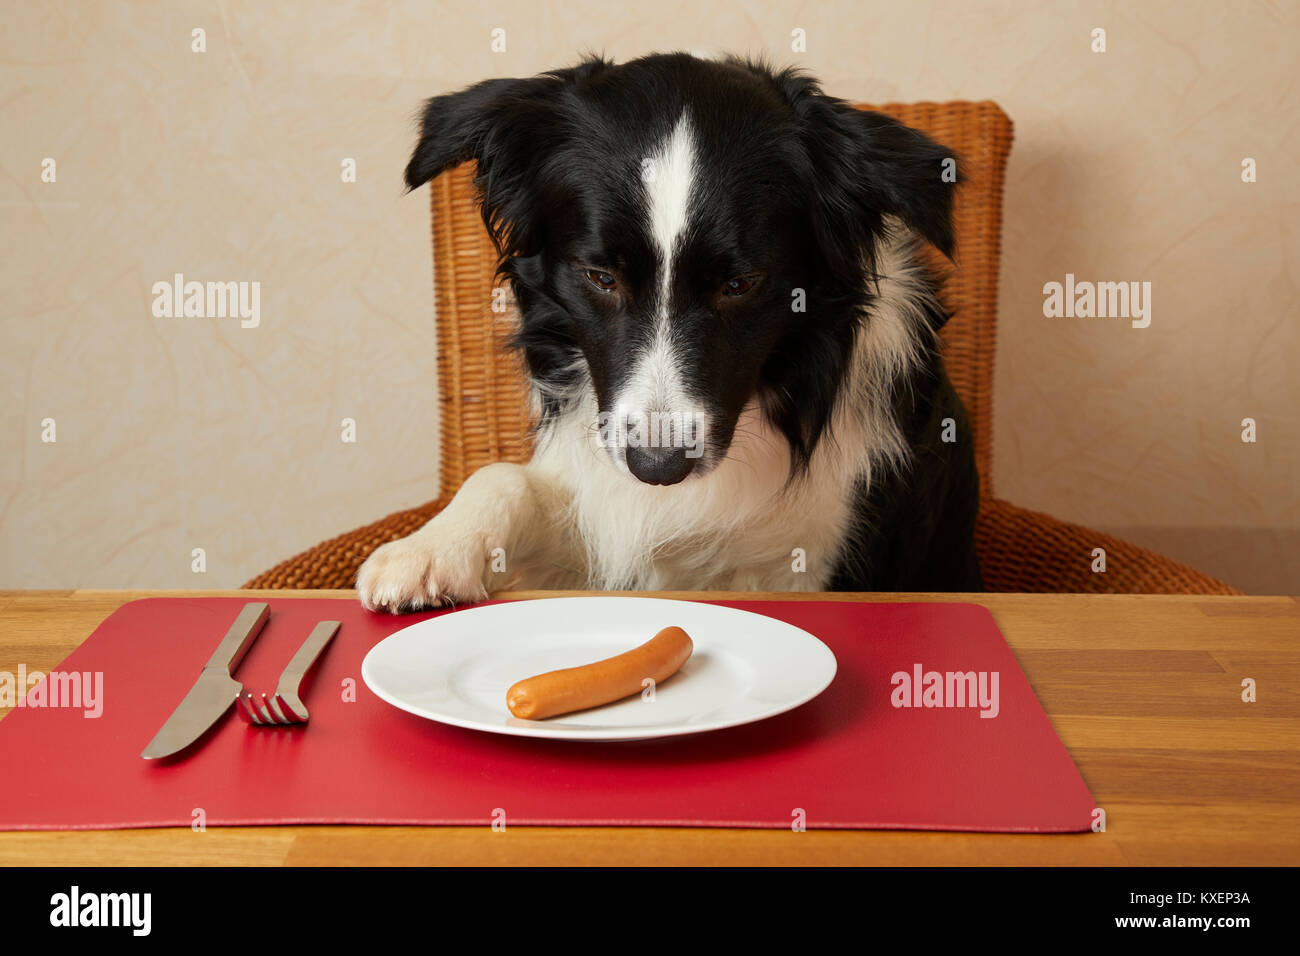 Border Collie sits at the table with sausages on the plate Stock Photo